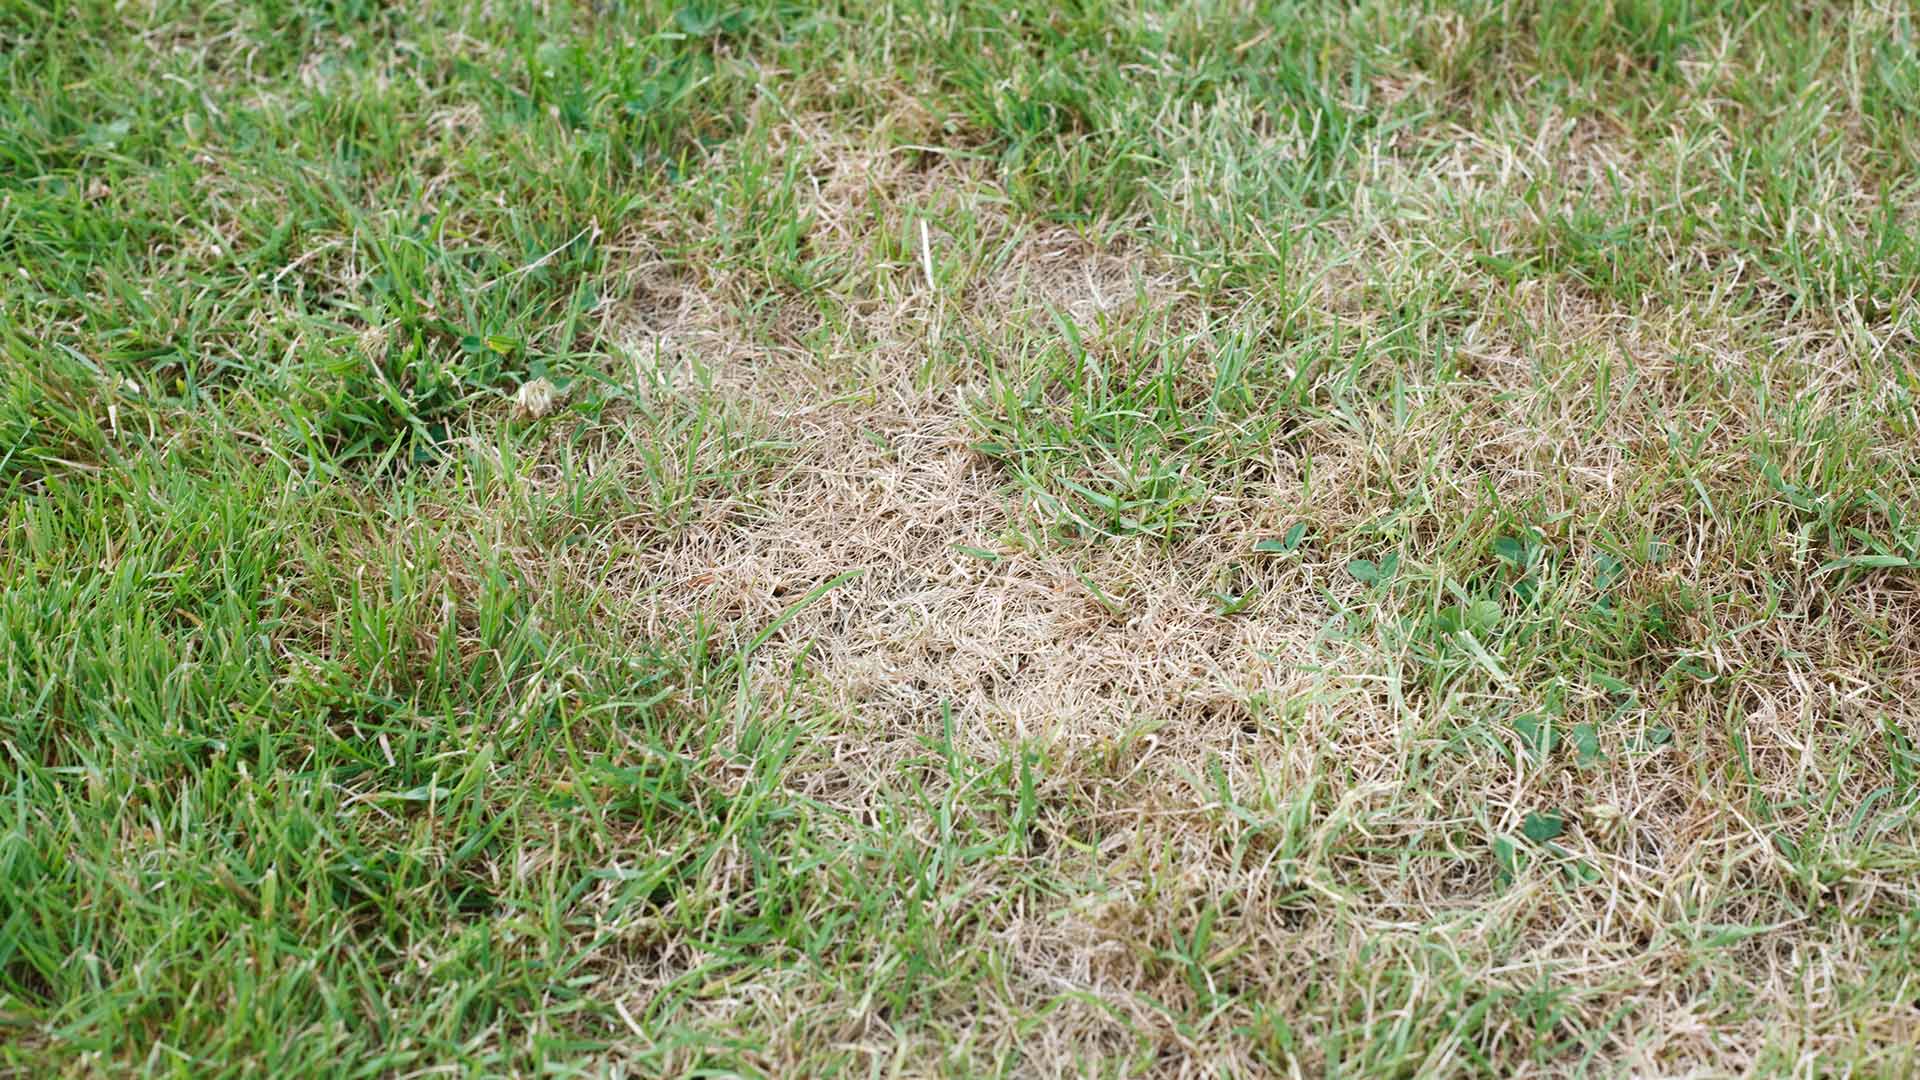 Is Your Lawn Suffering From Brown Patch? Here’s What to Do